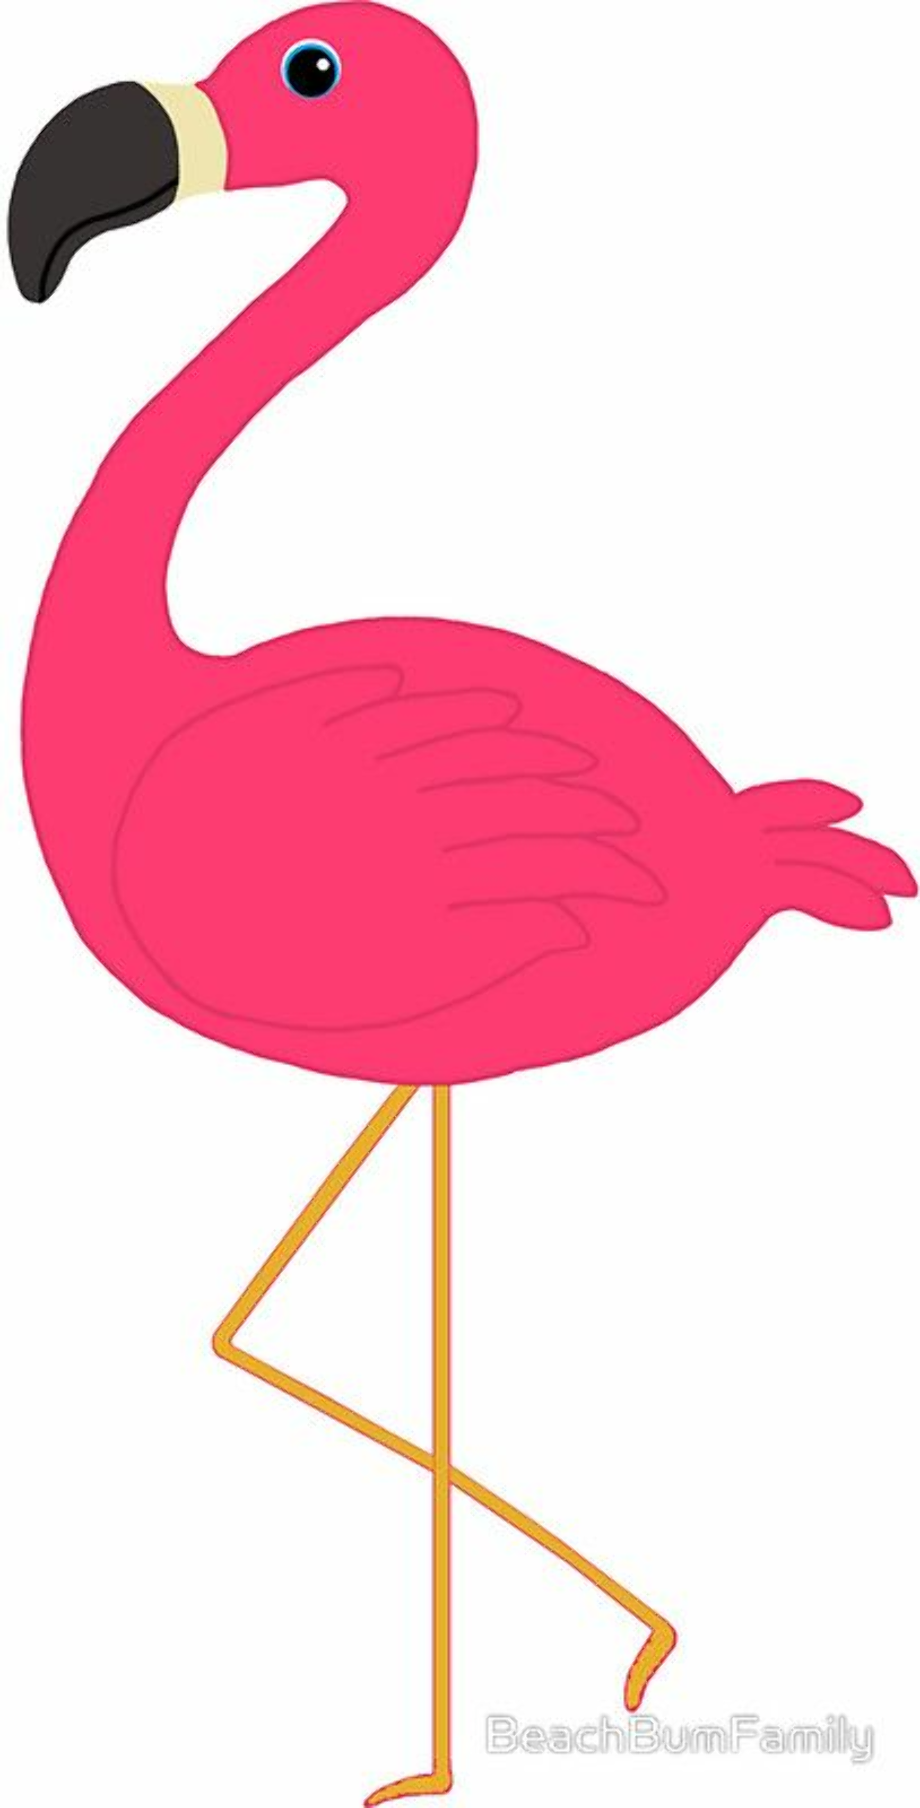 Download High Quality Flamingo Clipart Cute Transparent PNG Images 